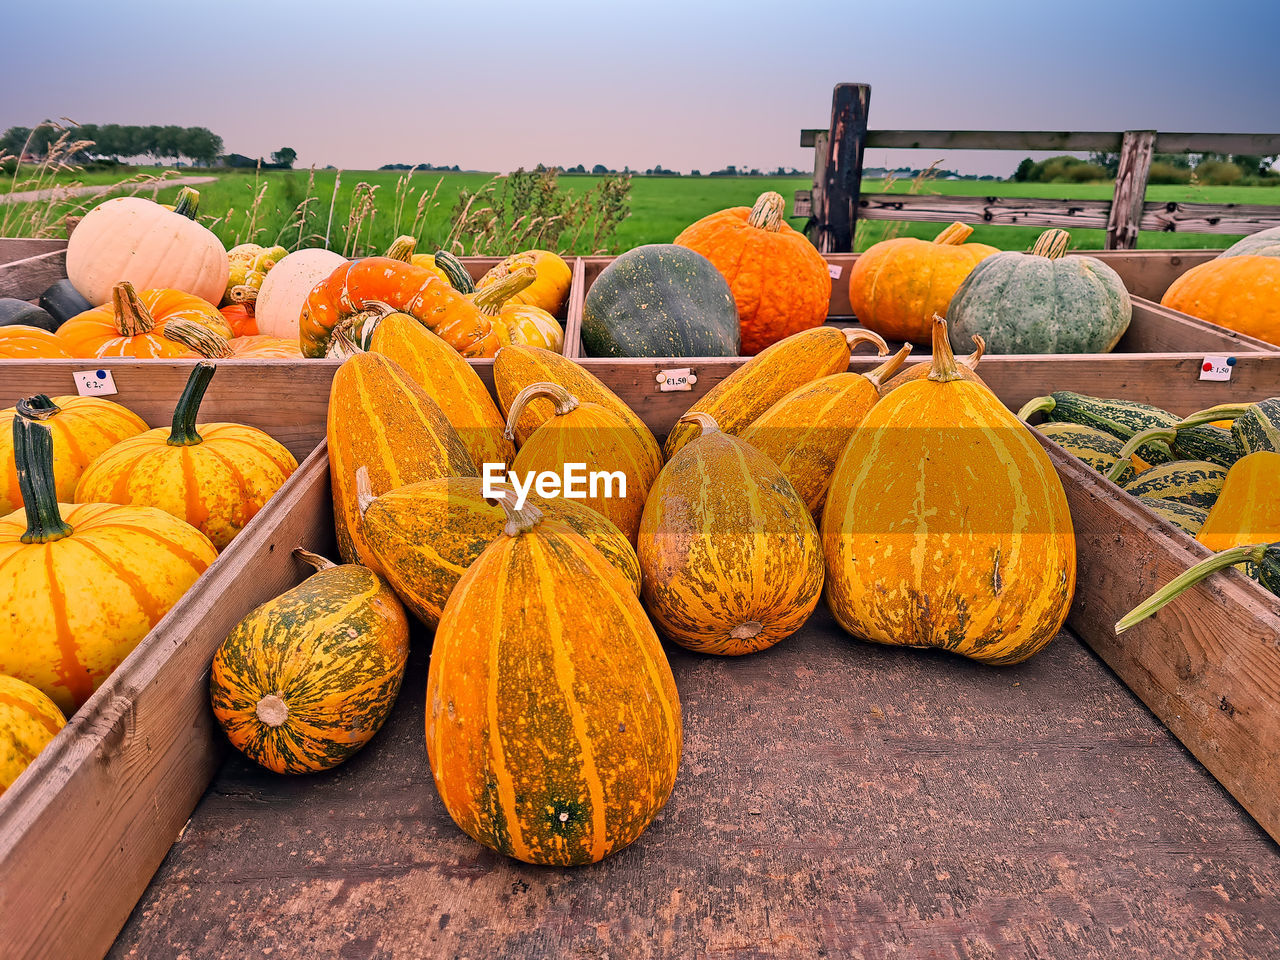 Different kind of pumpkins on a wooden cart in the countryside from the netherlands